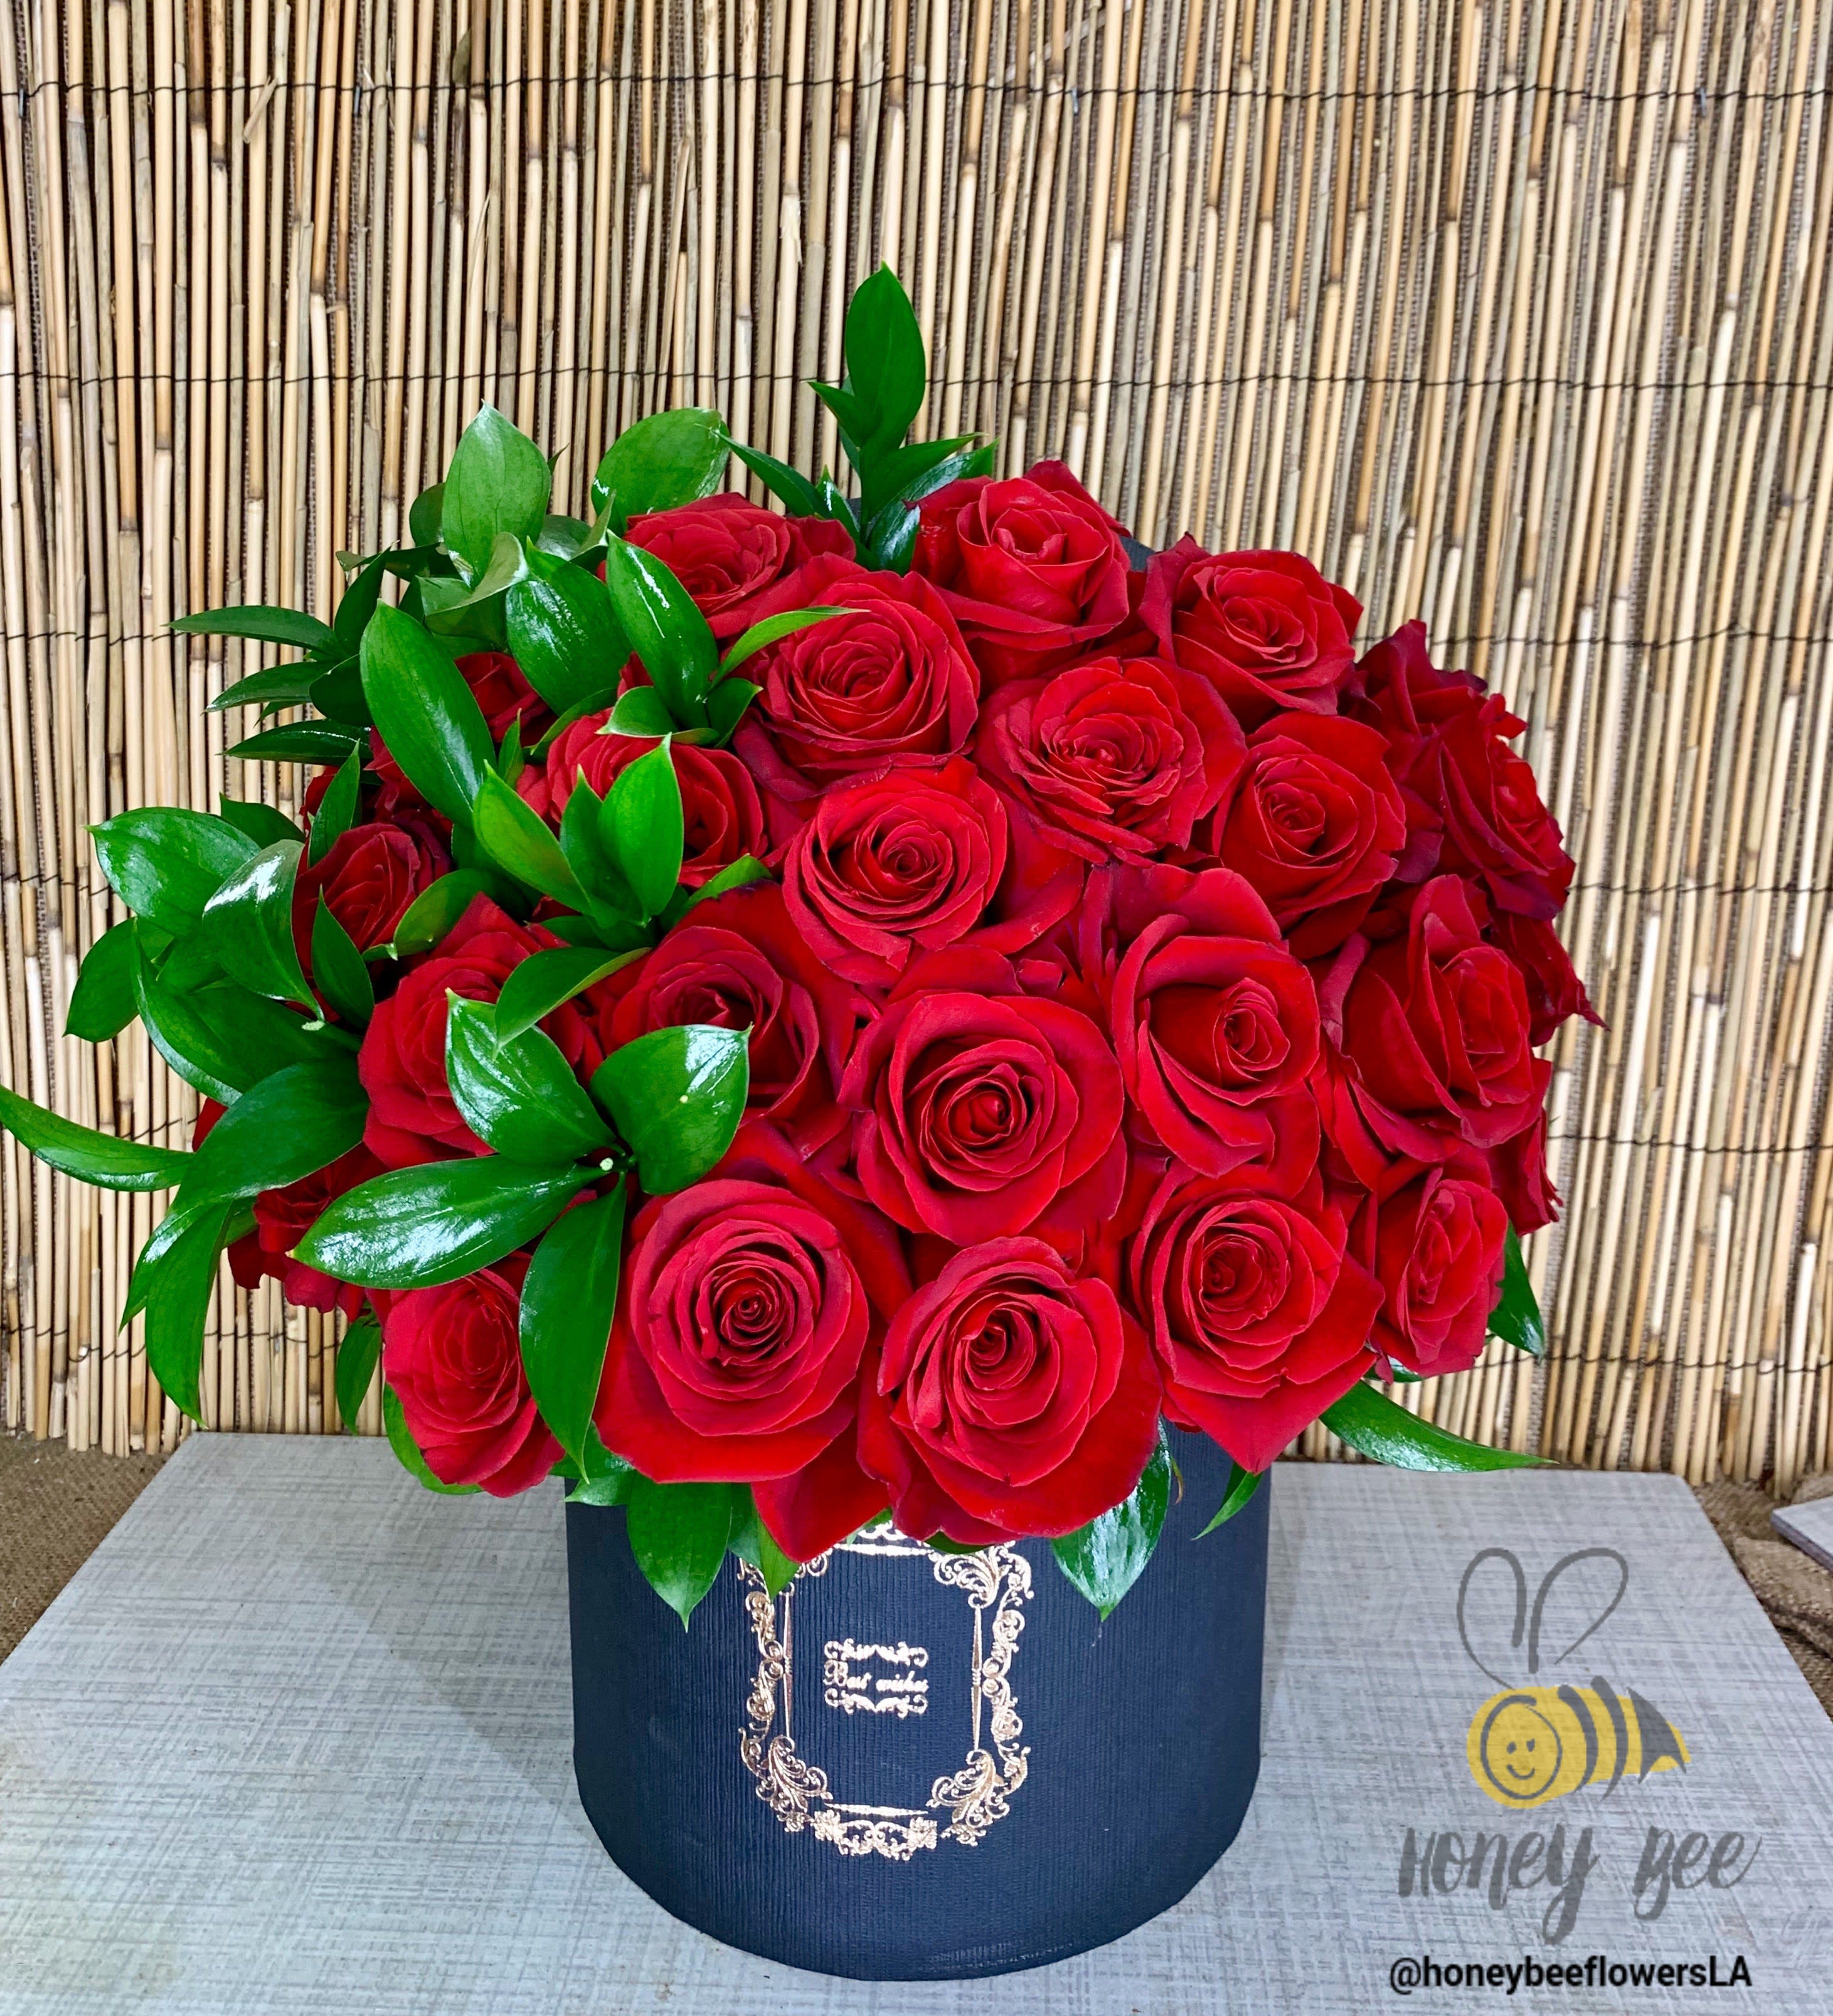 Roses in Hatbox - This modern rose arrangement is the hot new trend. Red roses artfully arranged in a black hatbox. You may customize the color of the roses, please let us know in the special instructions!  Standard - 2 dozen Deluxe - 2.5 dozen Premium - 3 dozen  